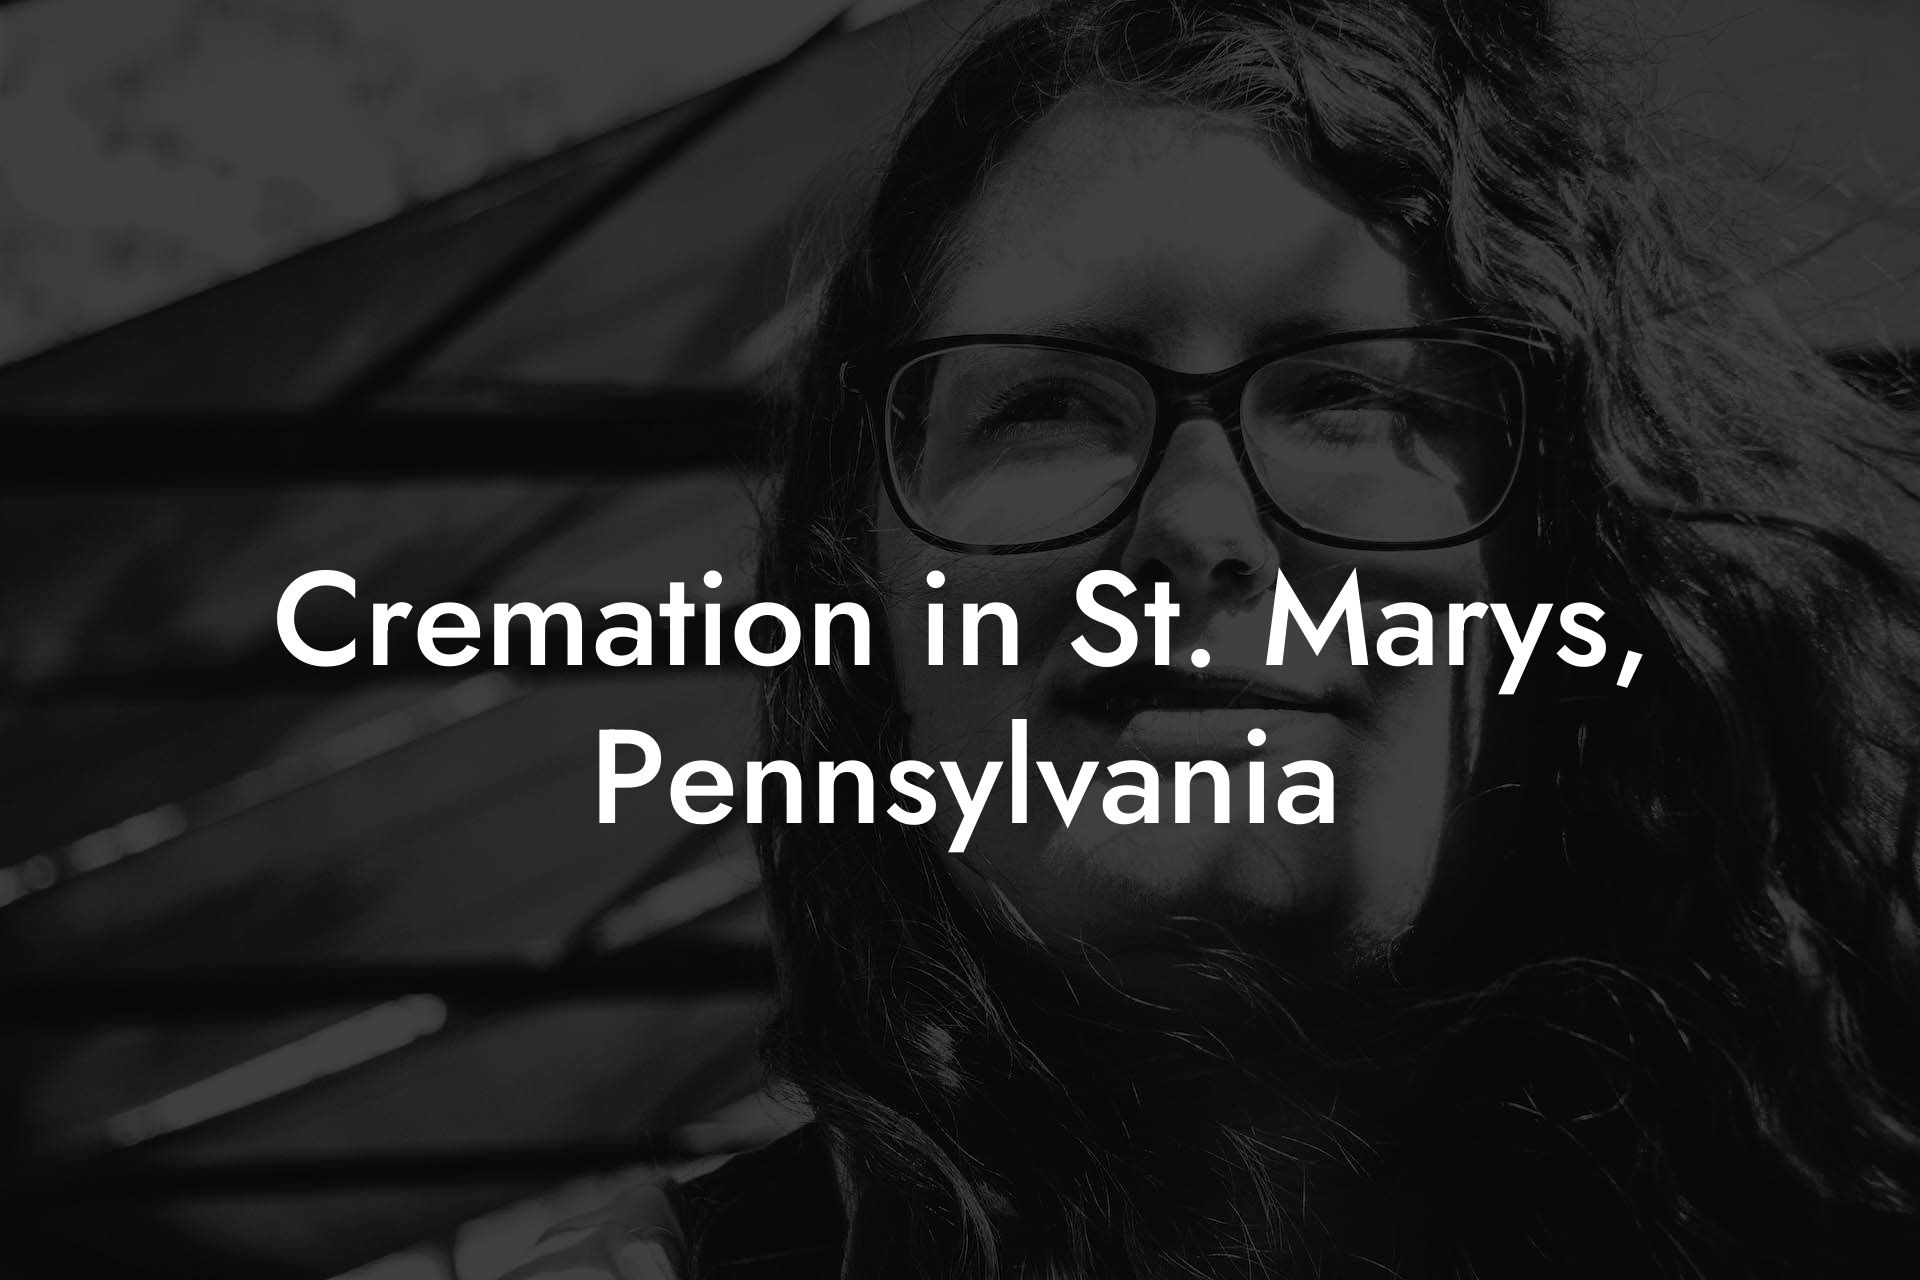 Cremation in St. Marys, Pennsylvania